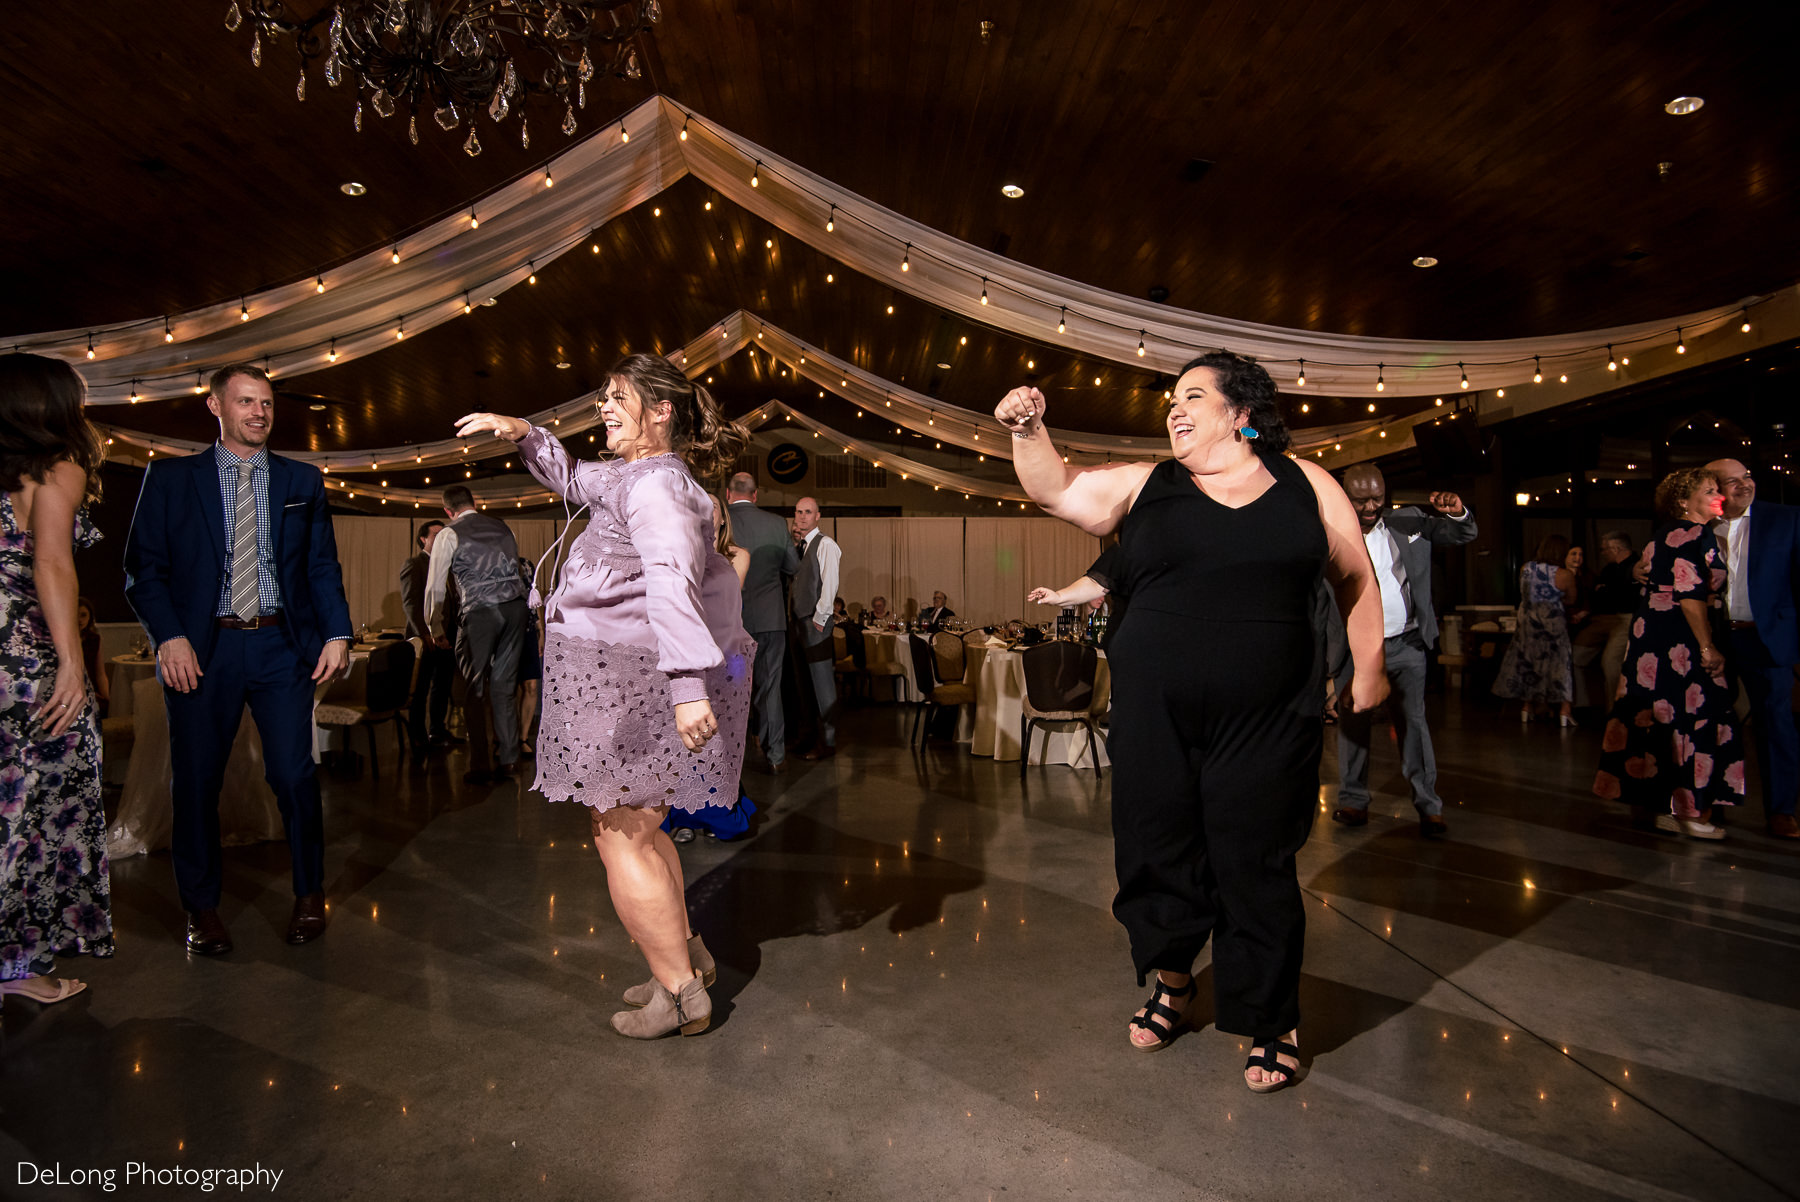 Guests doing a choreographed dance during a reception at Childress Vineyards by Charlotte Wedding Photographers DeLong Photography